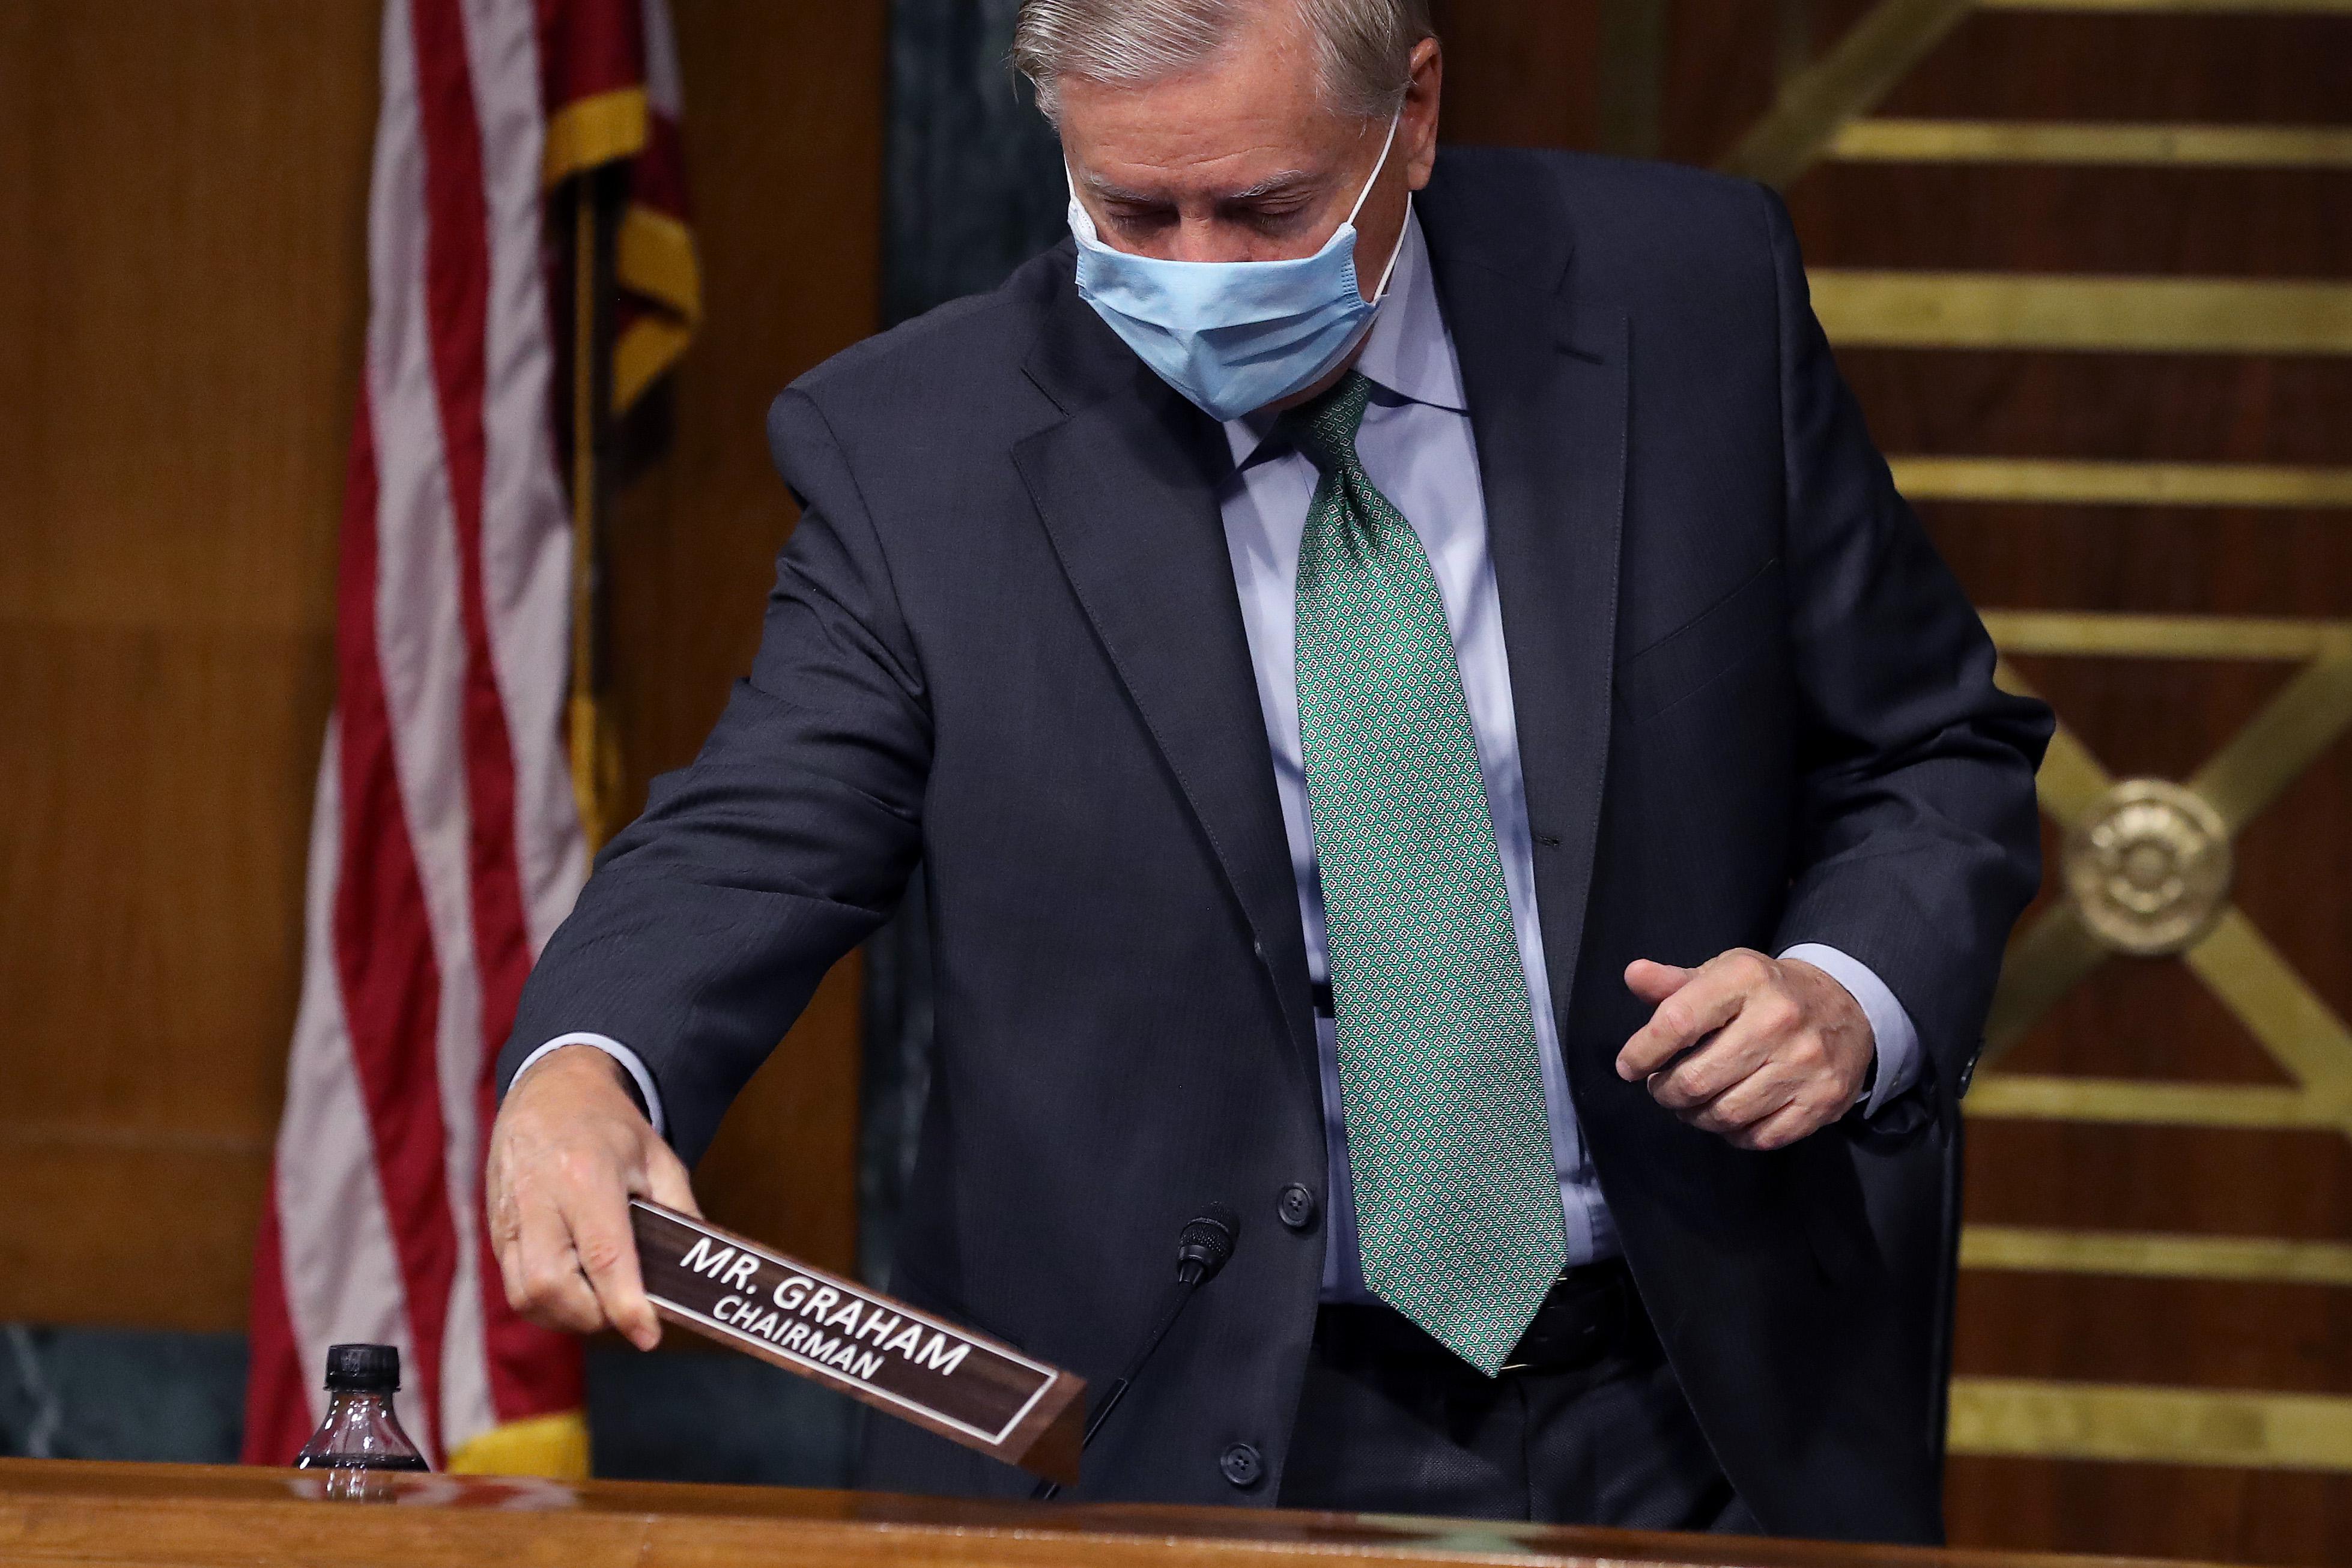 Graham holds his name plaque as he stands over his place on the judiciary committee's dais.